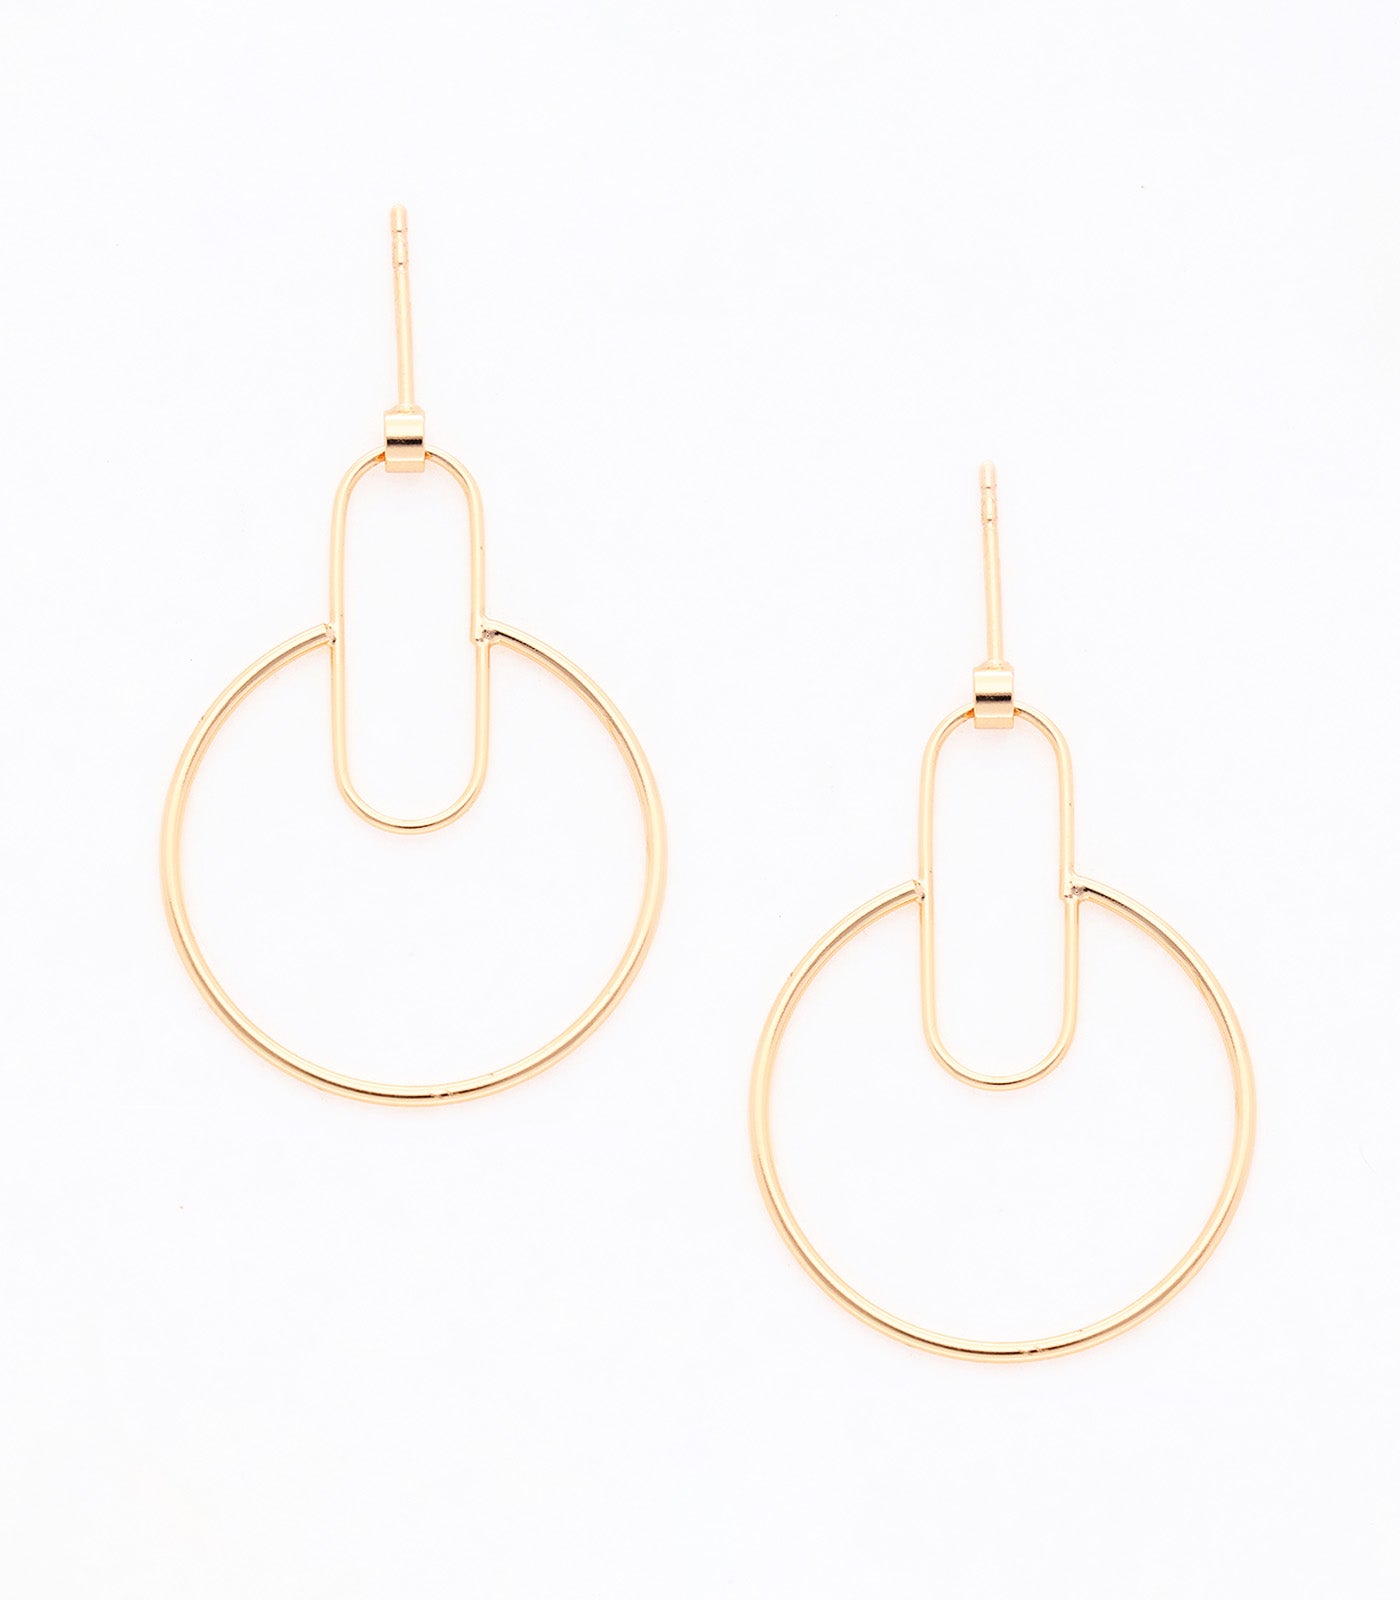 CATCH ME IF YOU CAN EARRINGS (BRASS)